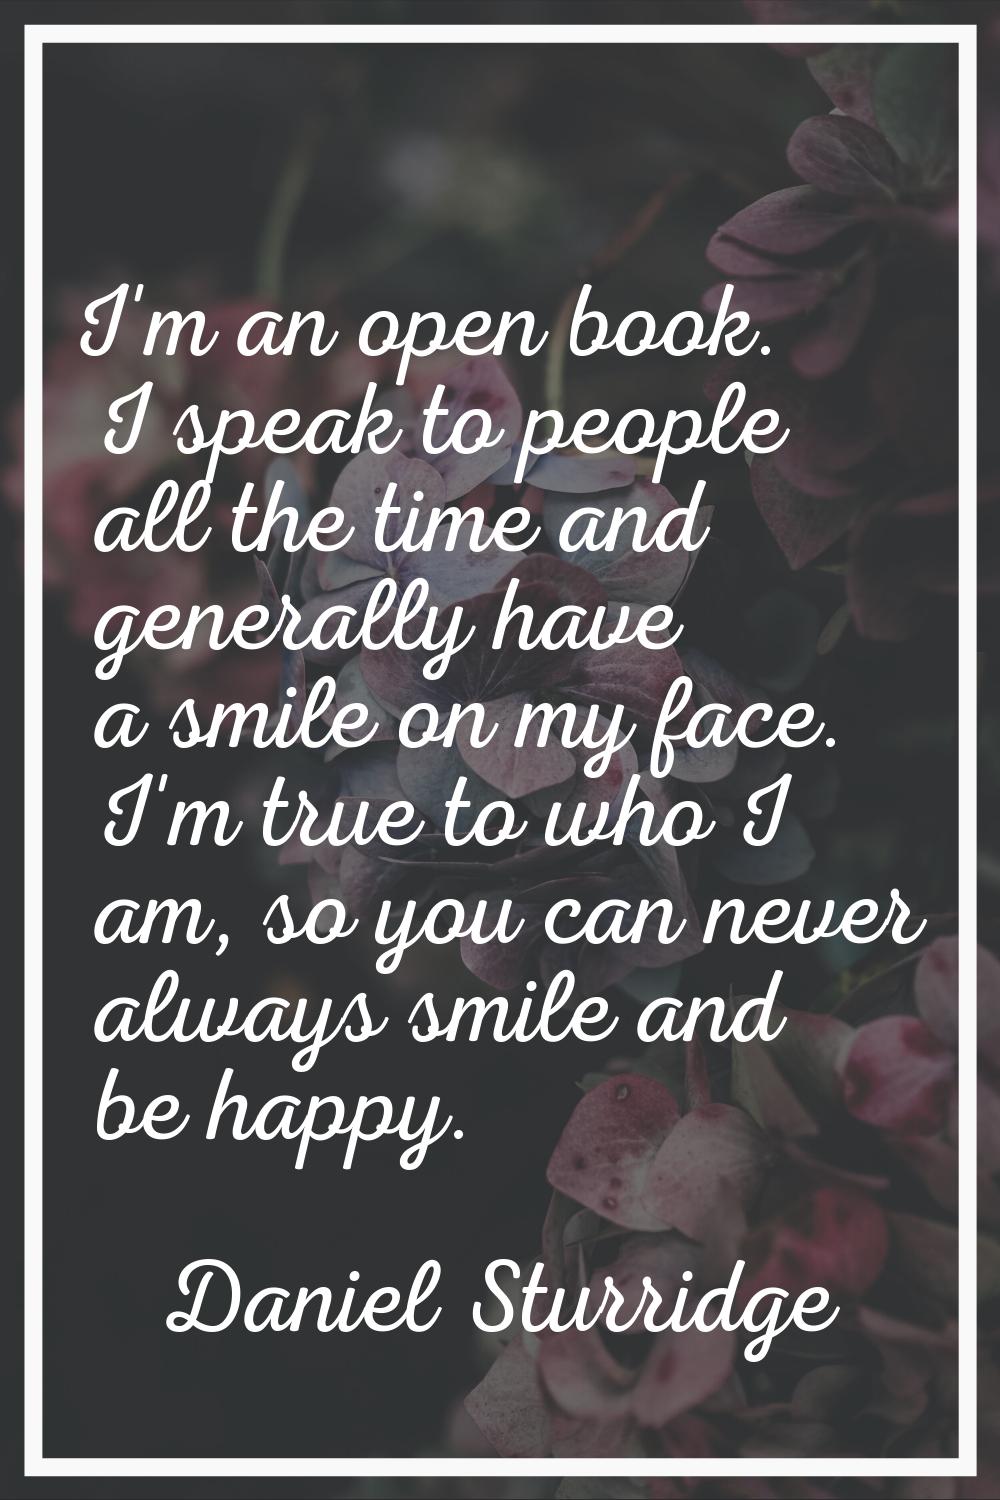 I'm an open book. I speak to people all the time and generally have a smile on my face. I'm true to